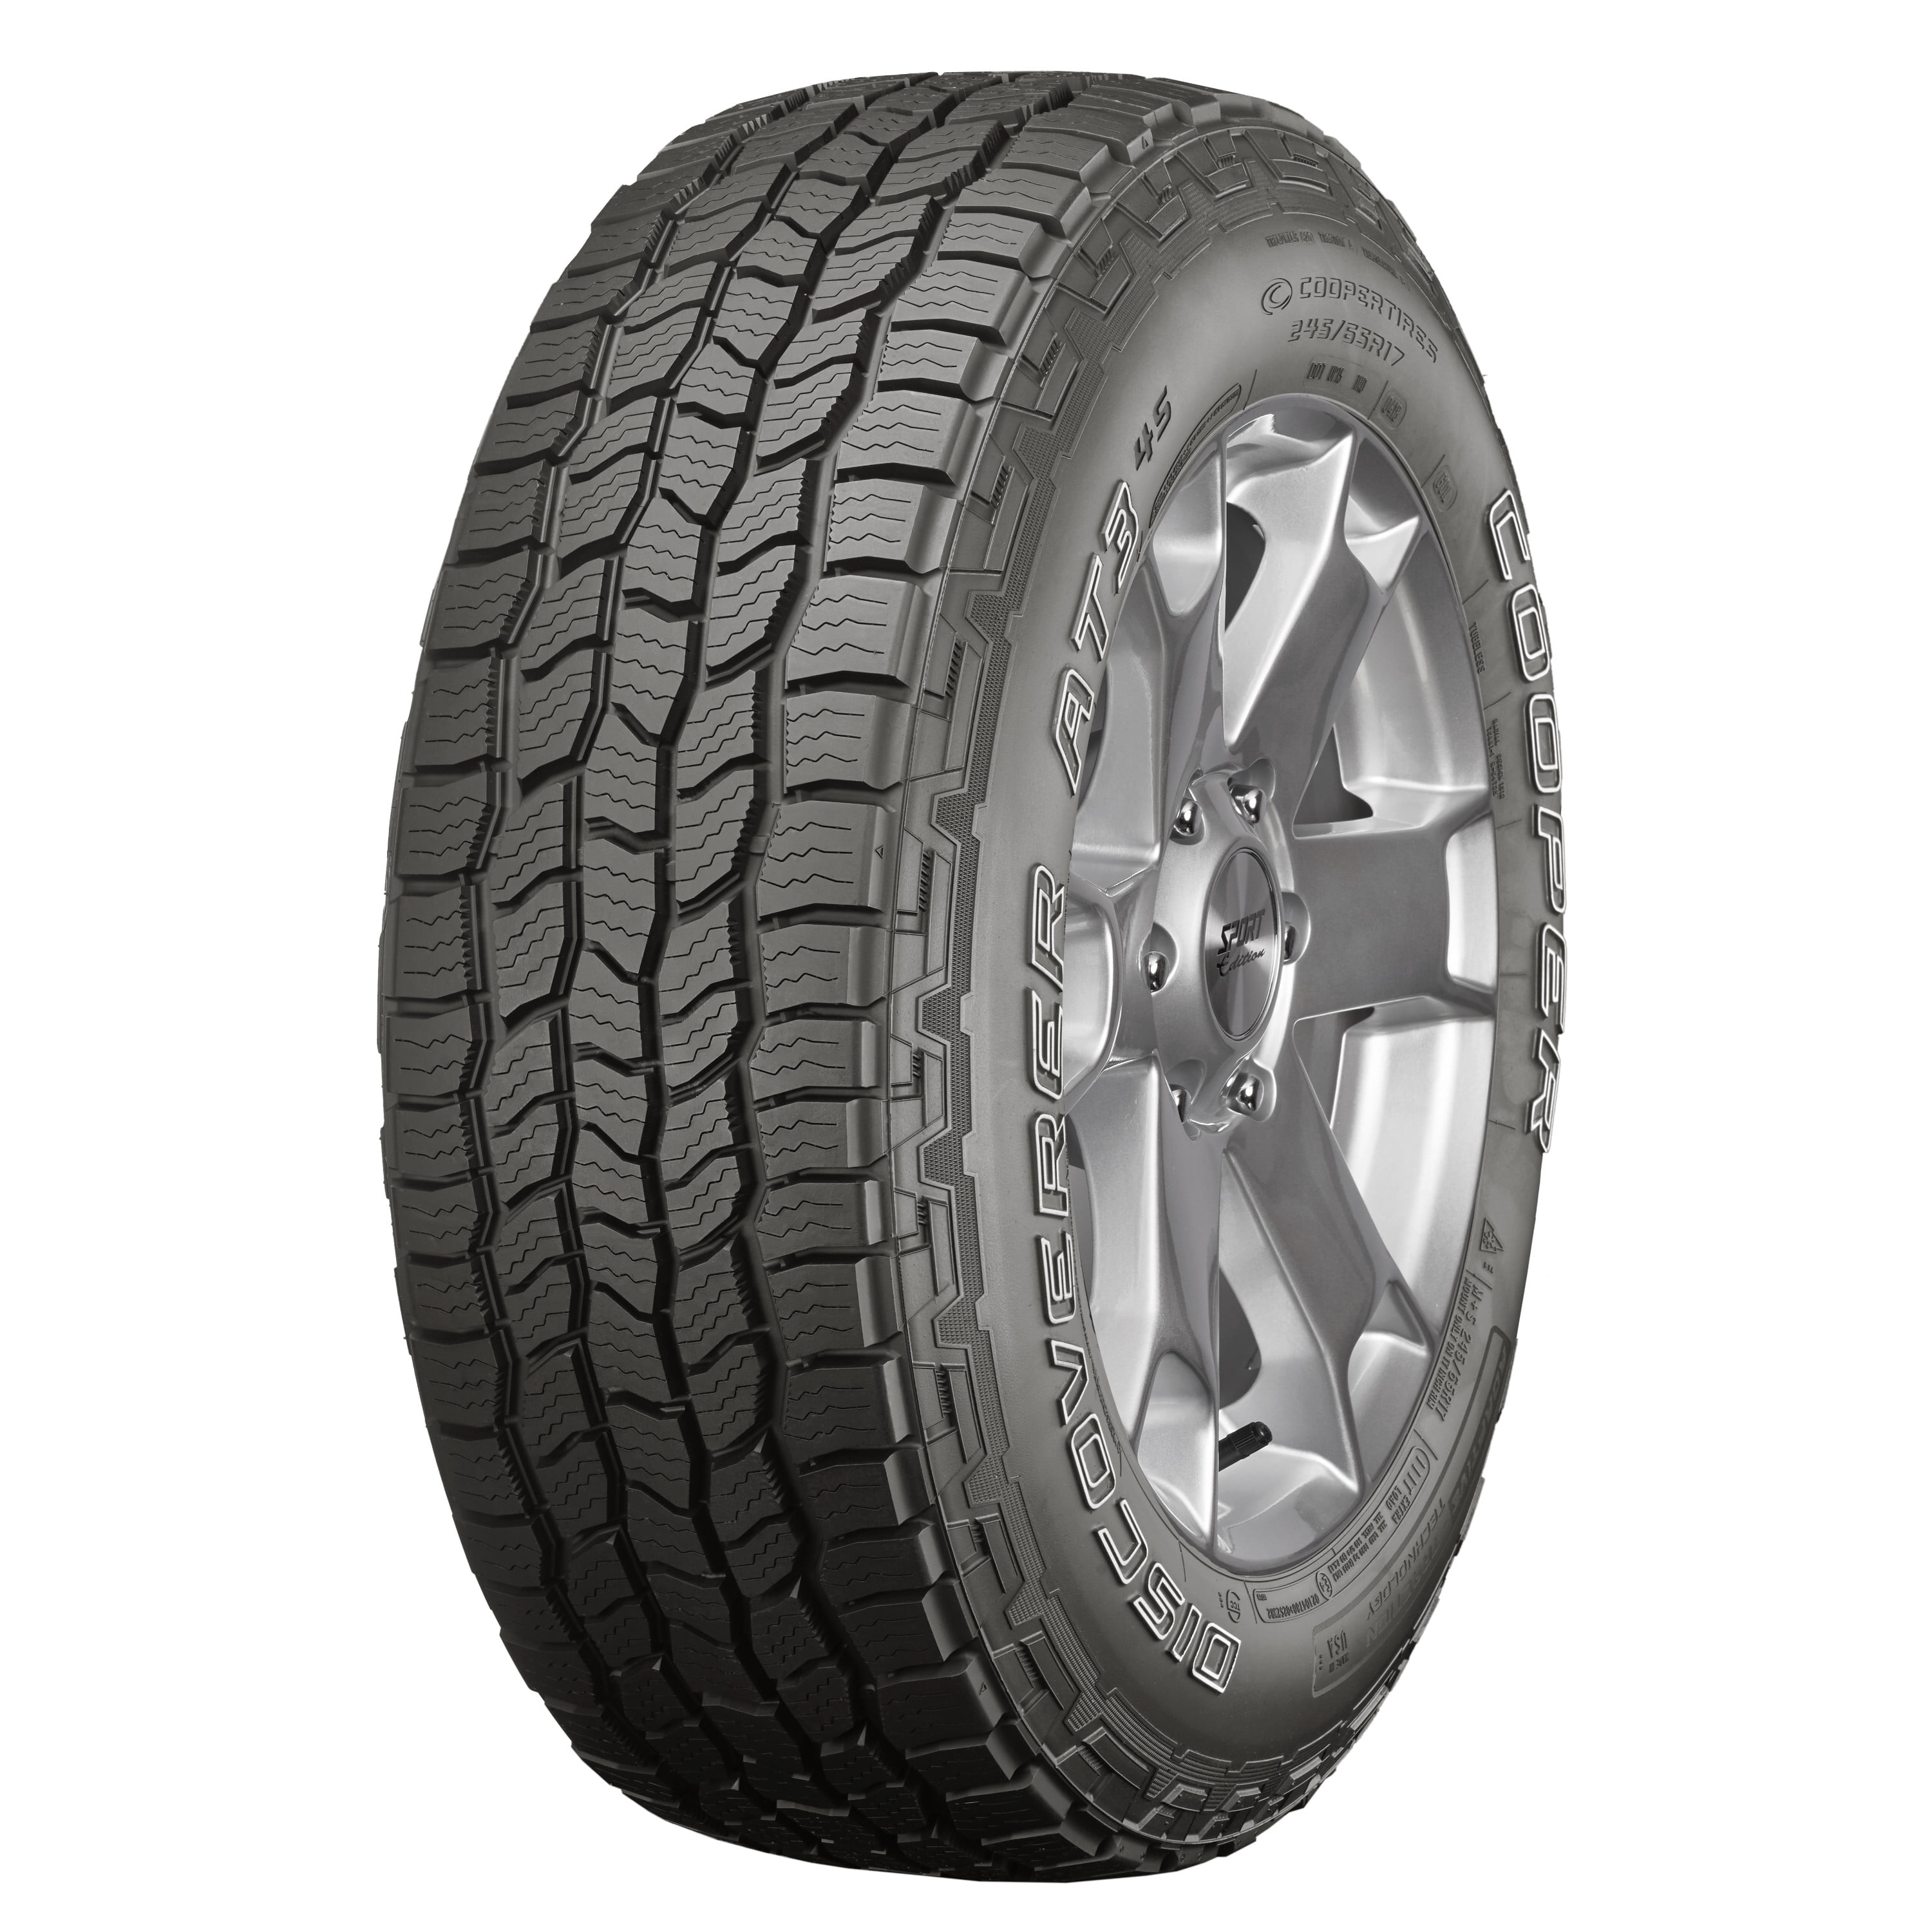 cooper-discoverer-at3-4s-all-season-285-45r22-114h-tire-walmart